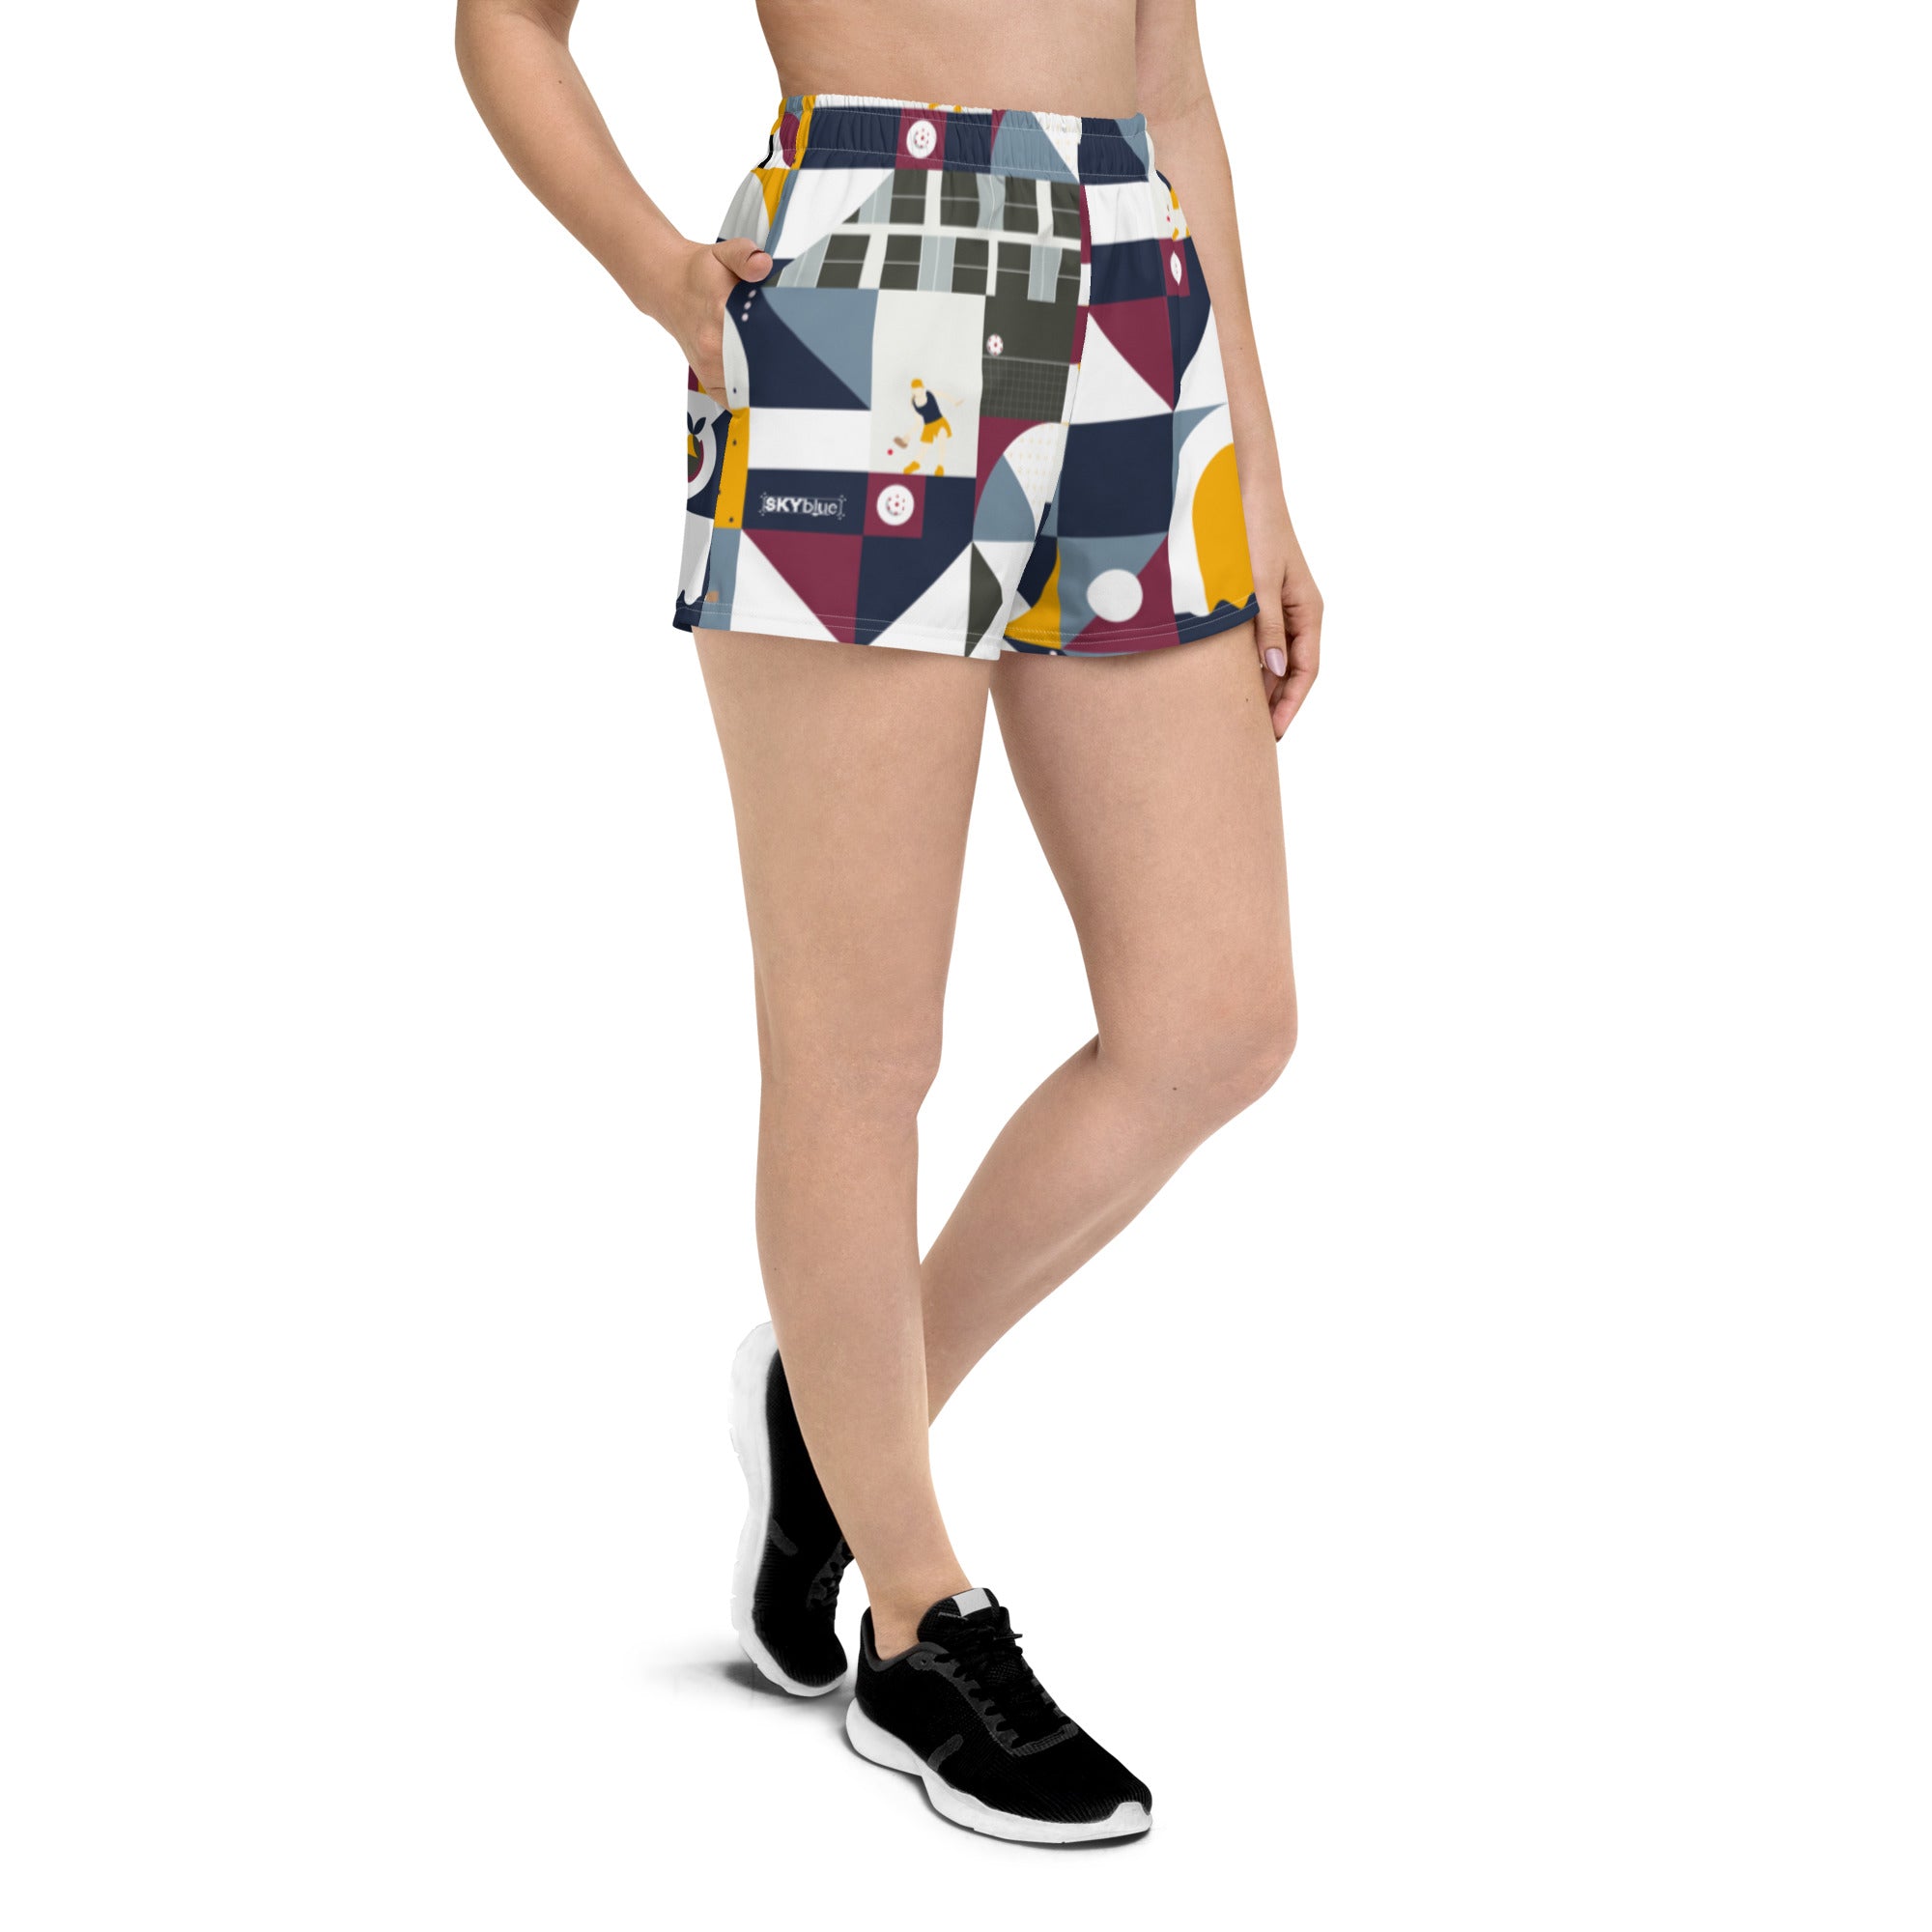 Dink & Drive under the Sun Soft Chaos© Women's Pickleball Athletic Short Shorts w/pockets